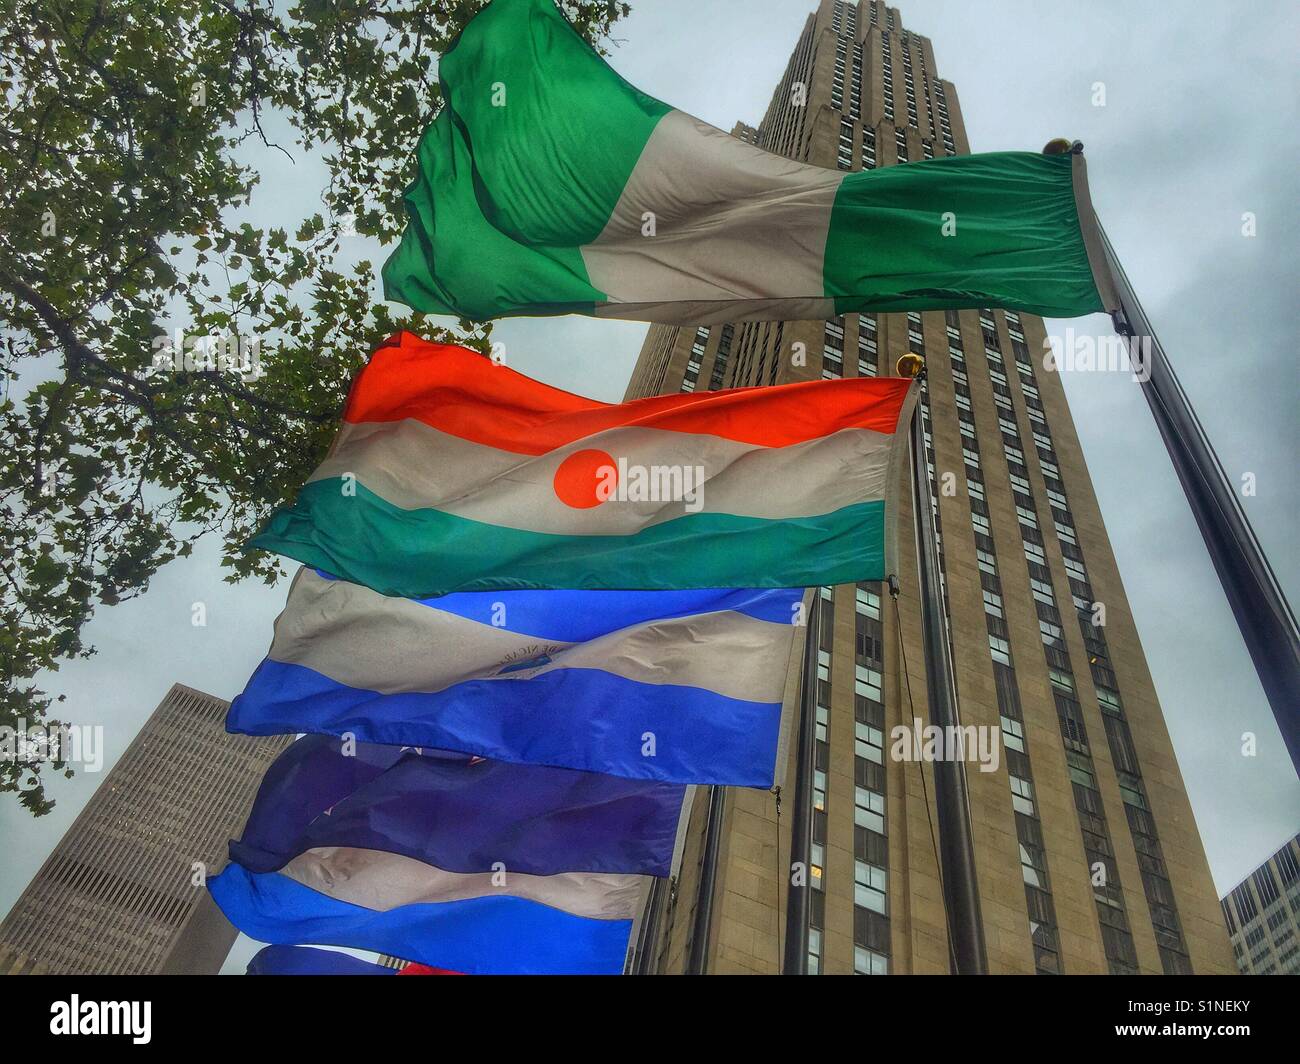 Flags of world nations fly at the Rockefeller Center with the Rockefeller building in the background, New York City, New York Stock Photo